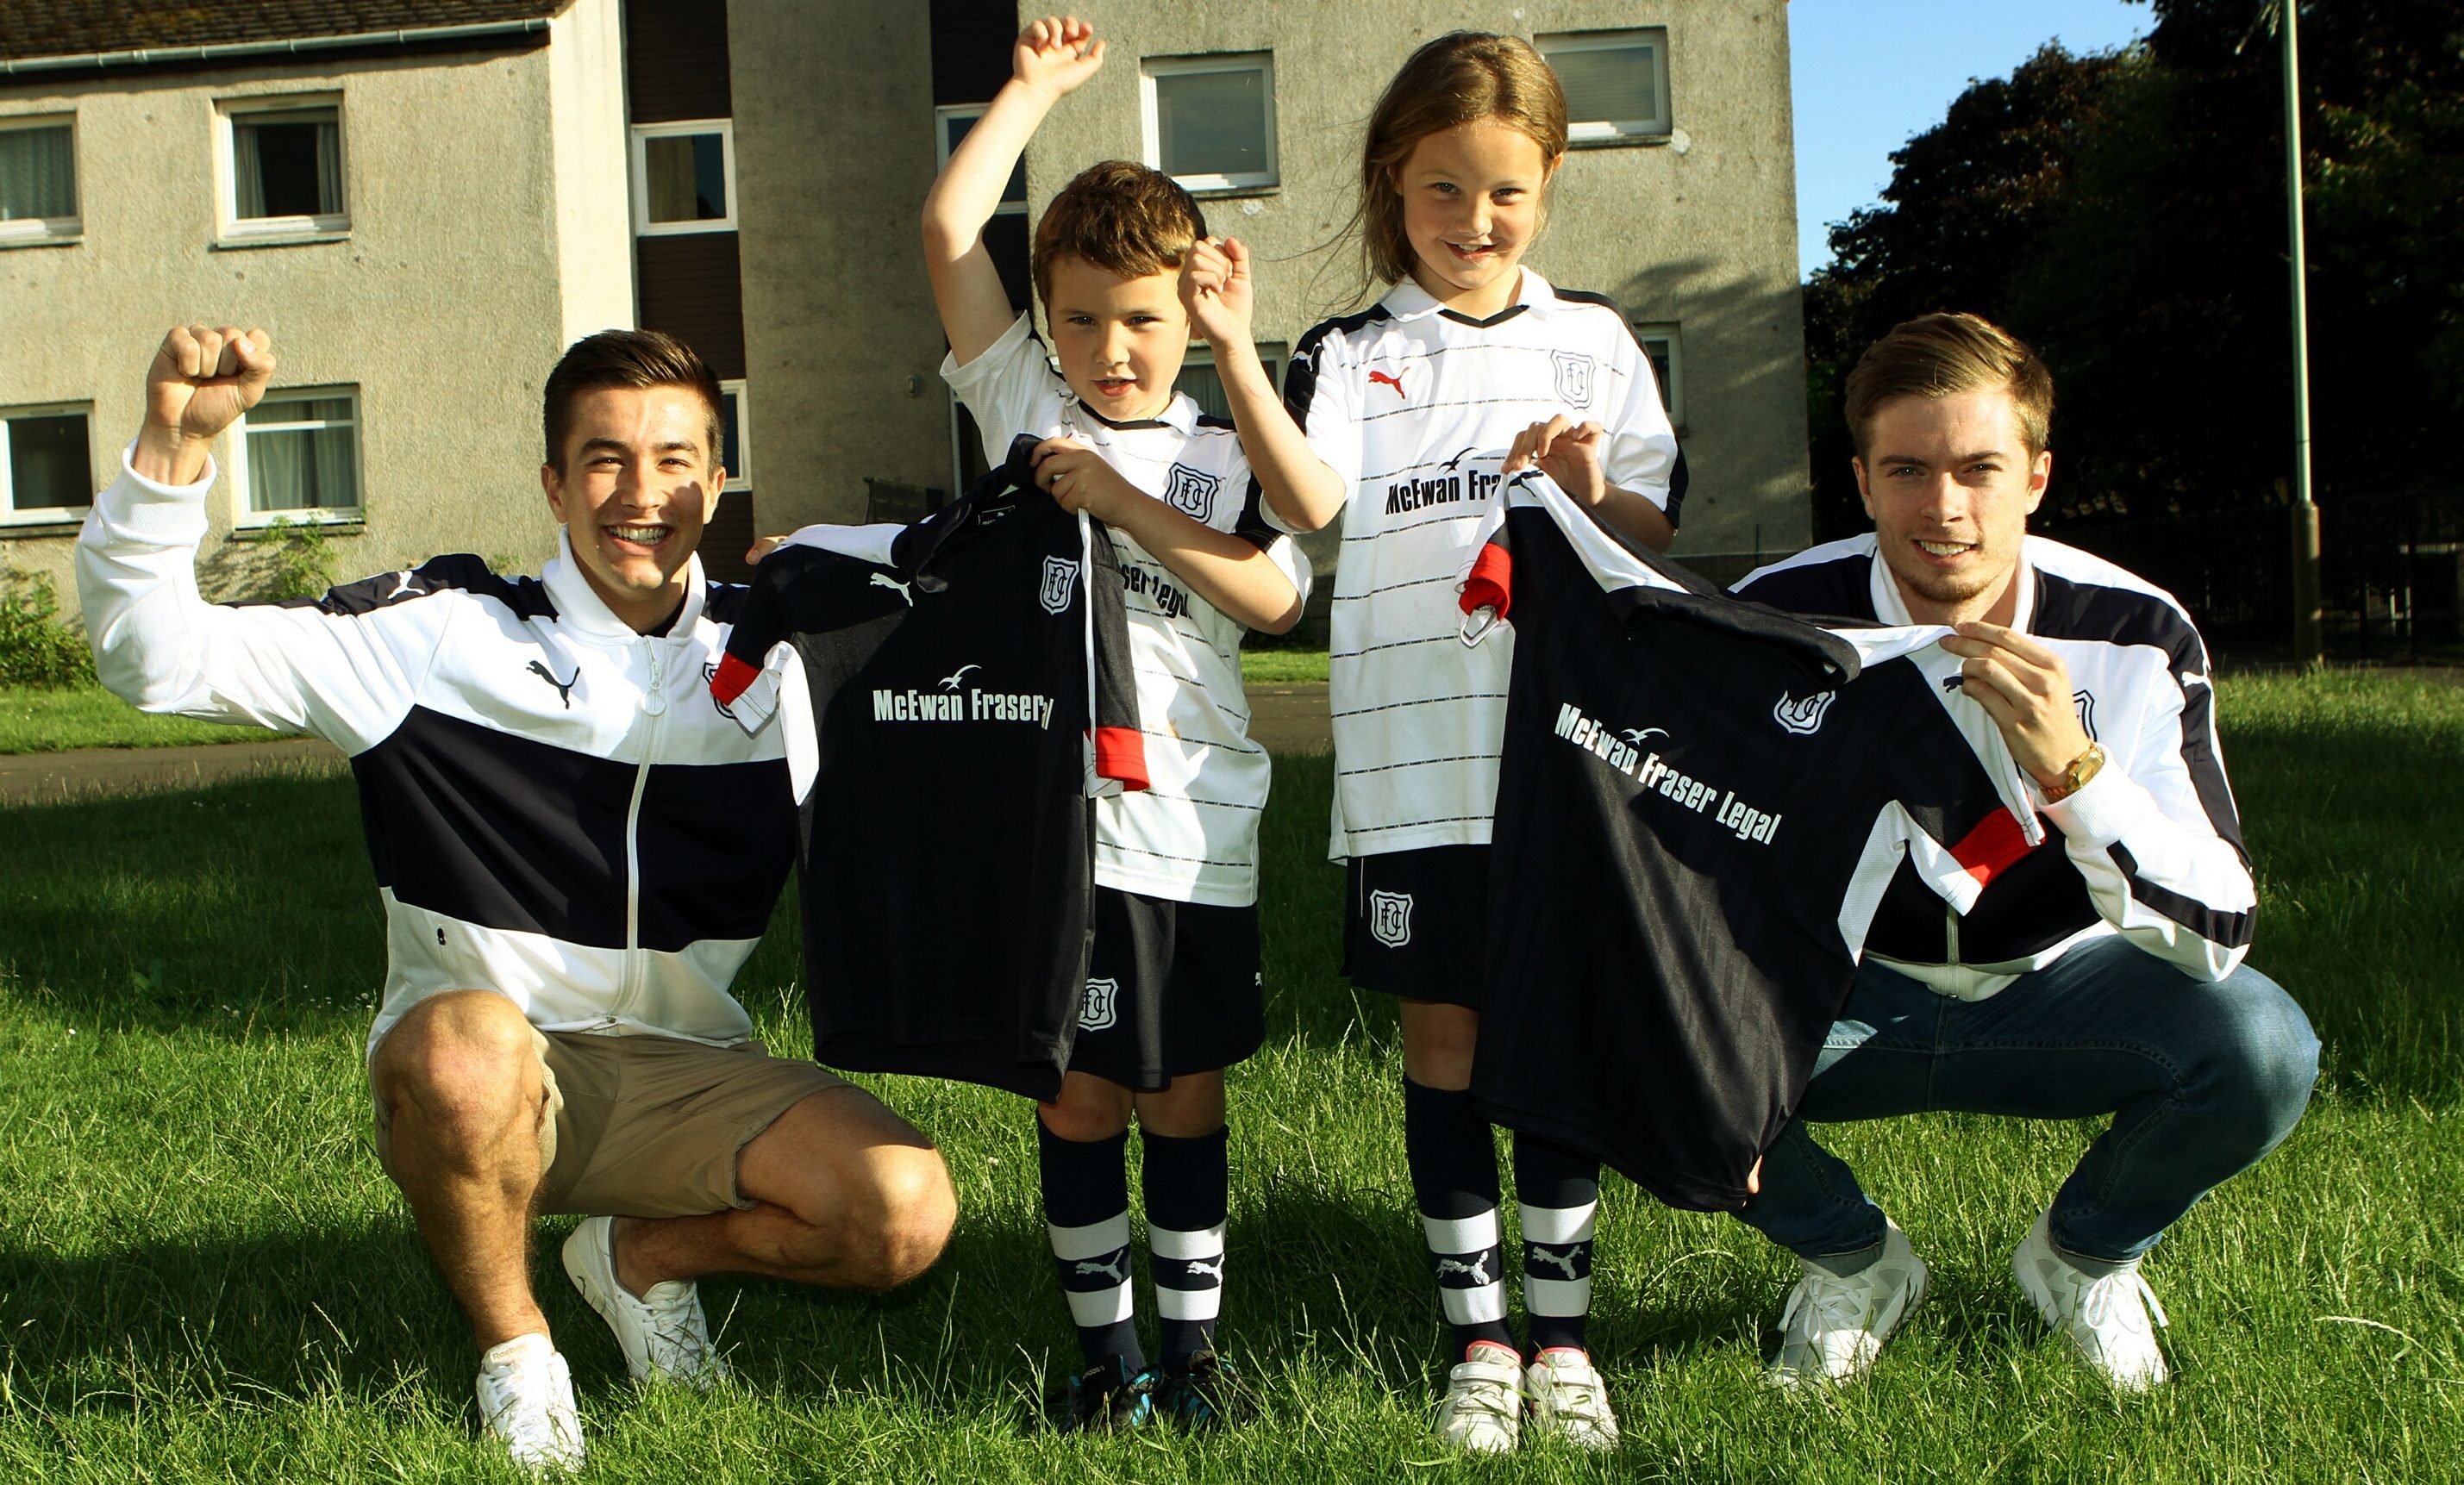 Dundee players Cammy Kerr and Craig Wighton presenting strips to Megan Riddell and brother Logan.